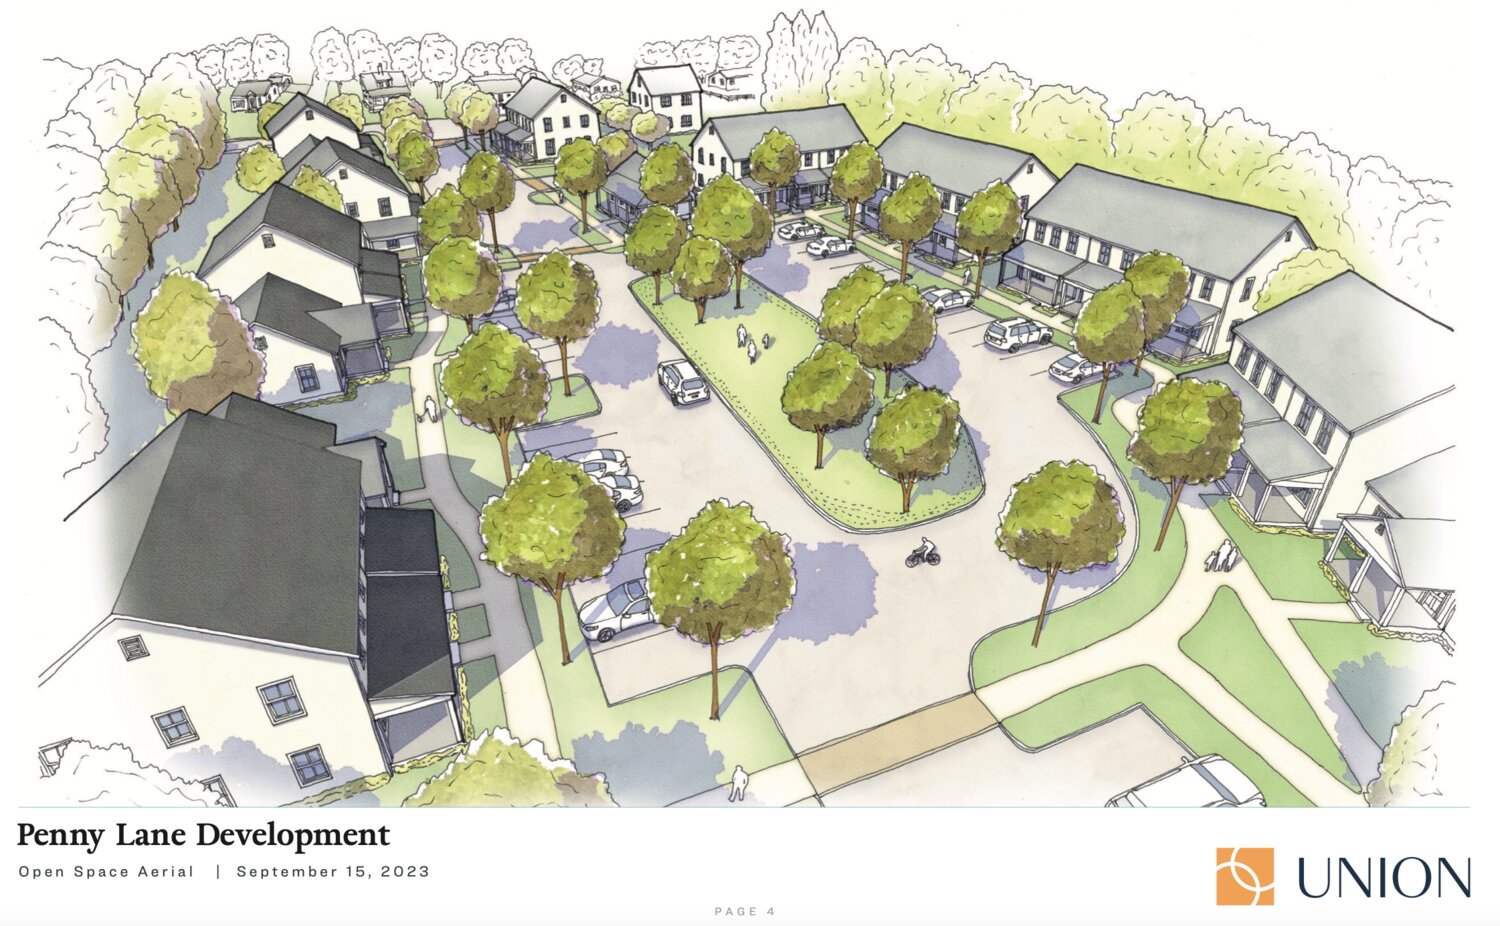 An overhead rendering of the proposed Penny Lane development shows the mix of townhouses with a green space in the middle. Each property would have multiple units and its own parking spaces.